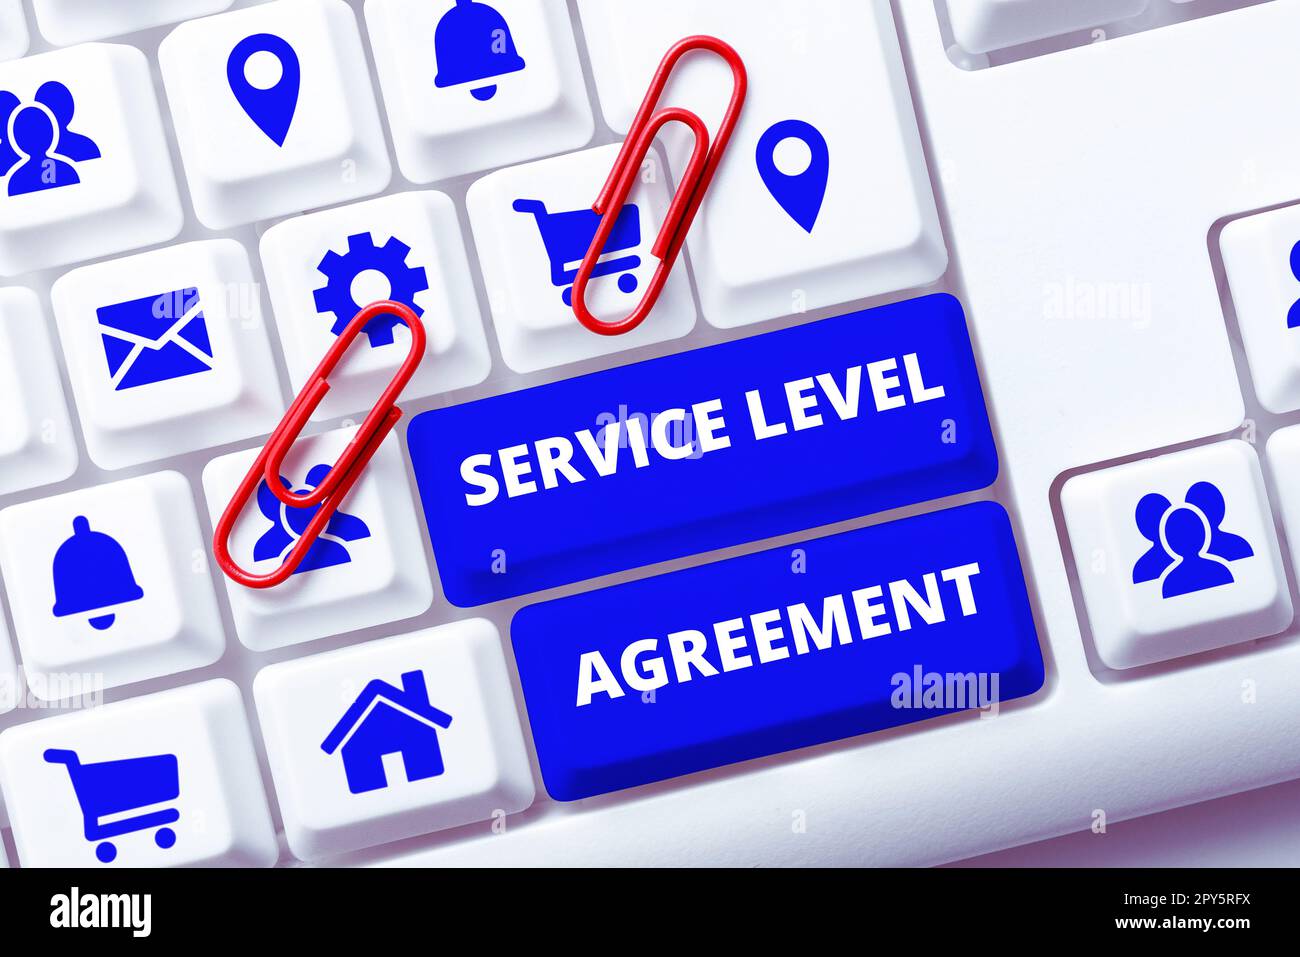 Writing displaying text Service Level Agreement. Business approach changing the way you serve better your customers Stock Photo